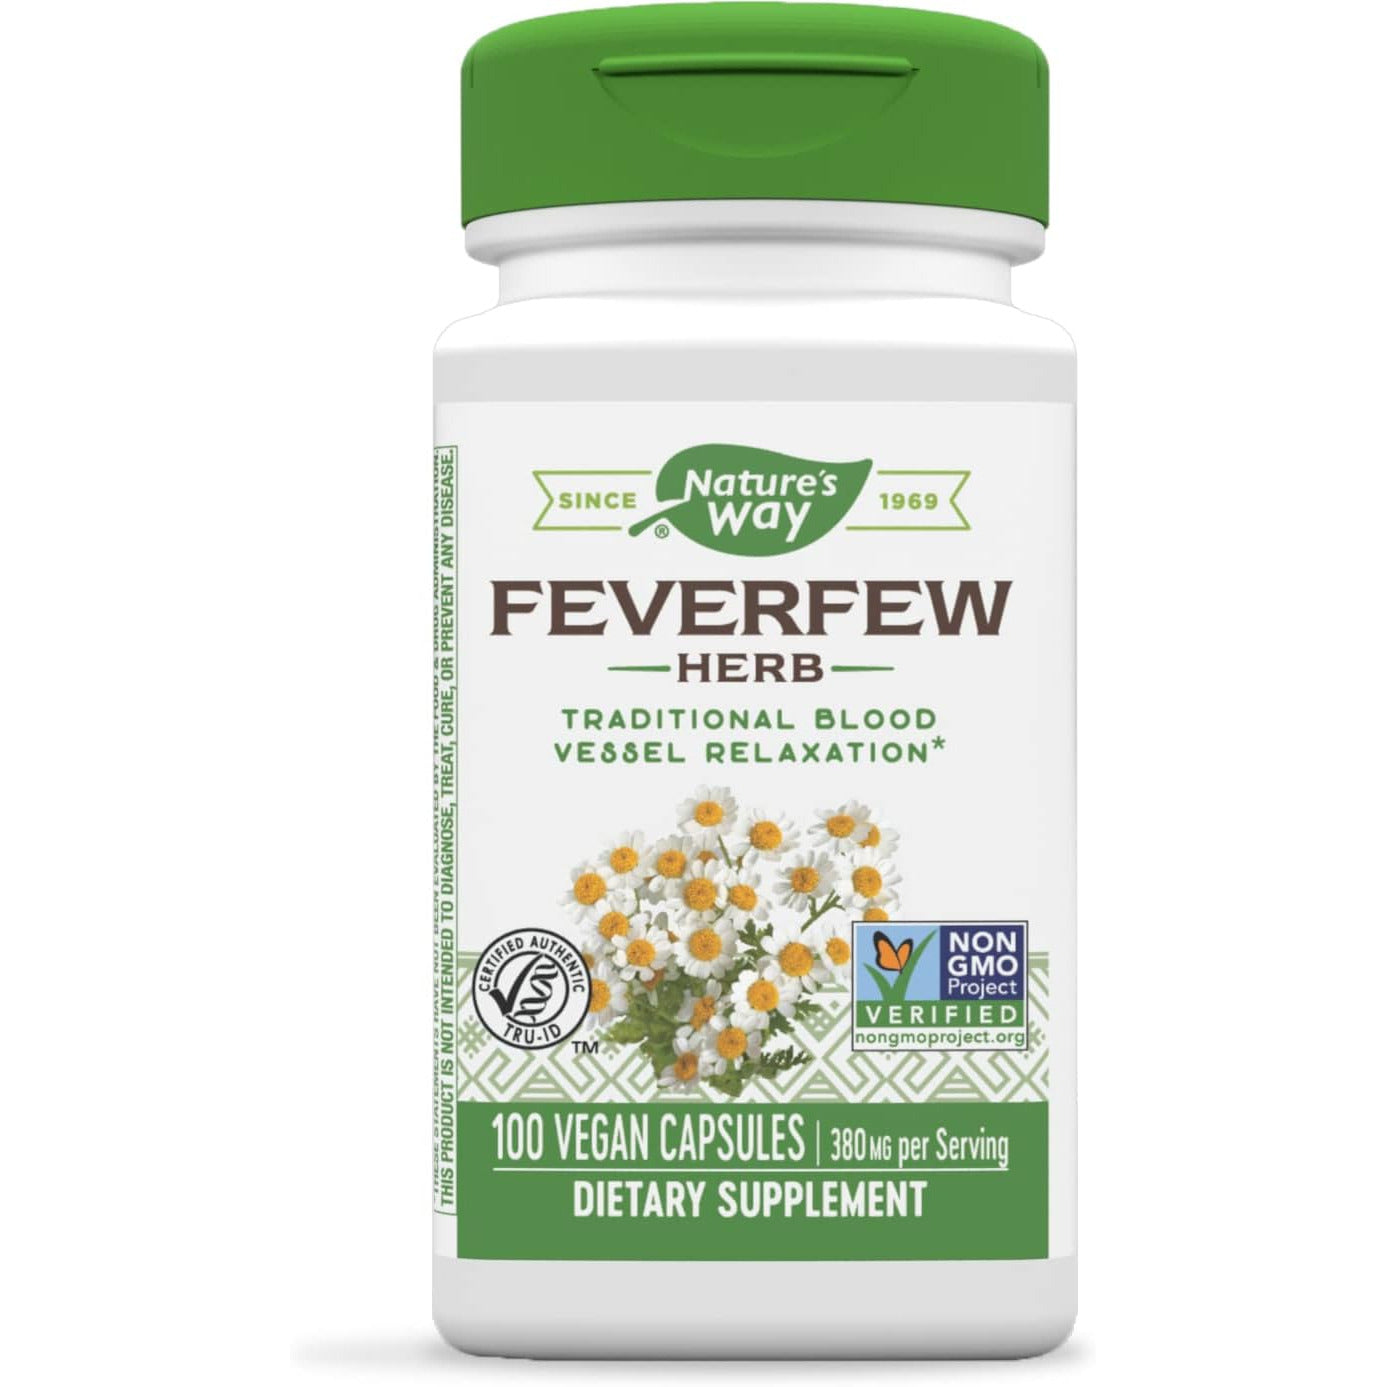 Nature's Way Feverfew Herb, Traditional Blood Vessel Relaxation